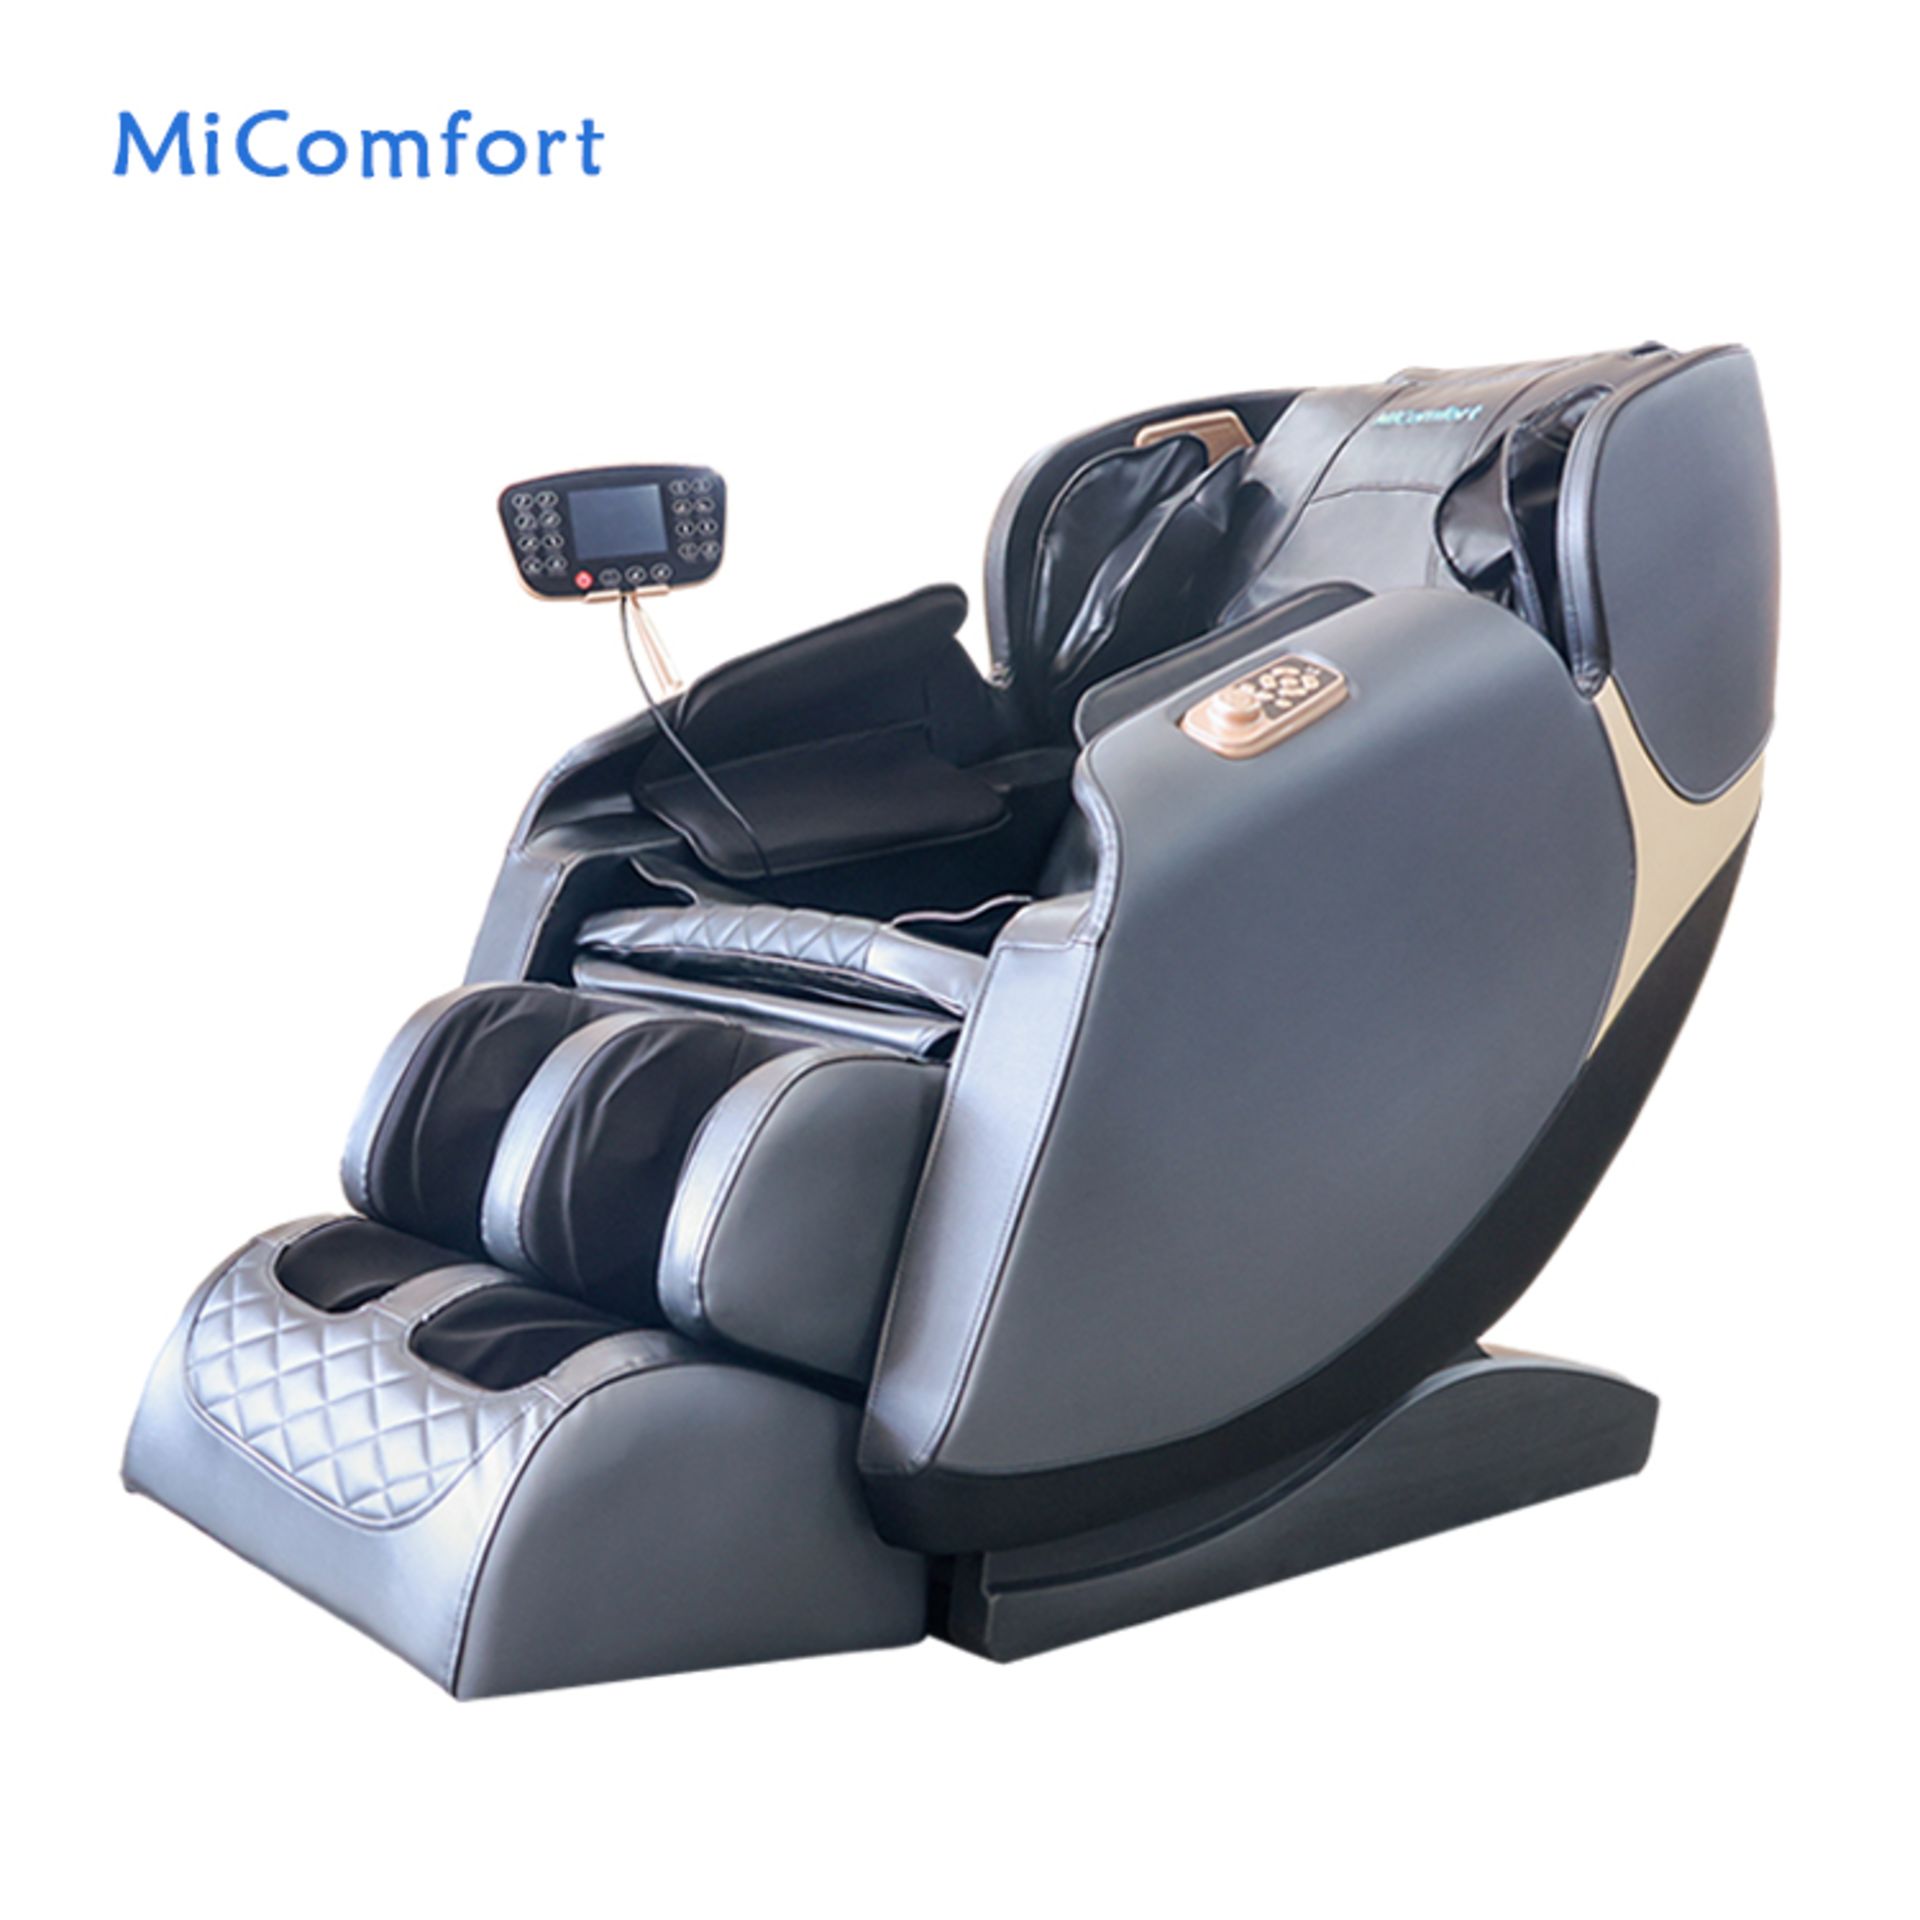 Brand New in Box Orchid Blue/Black MiComfort Full Body Massage Chair RRP £2199 *NO VAT* - Image 5 of 14